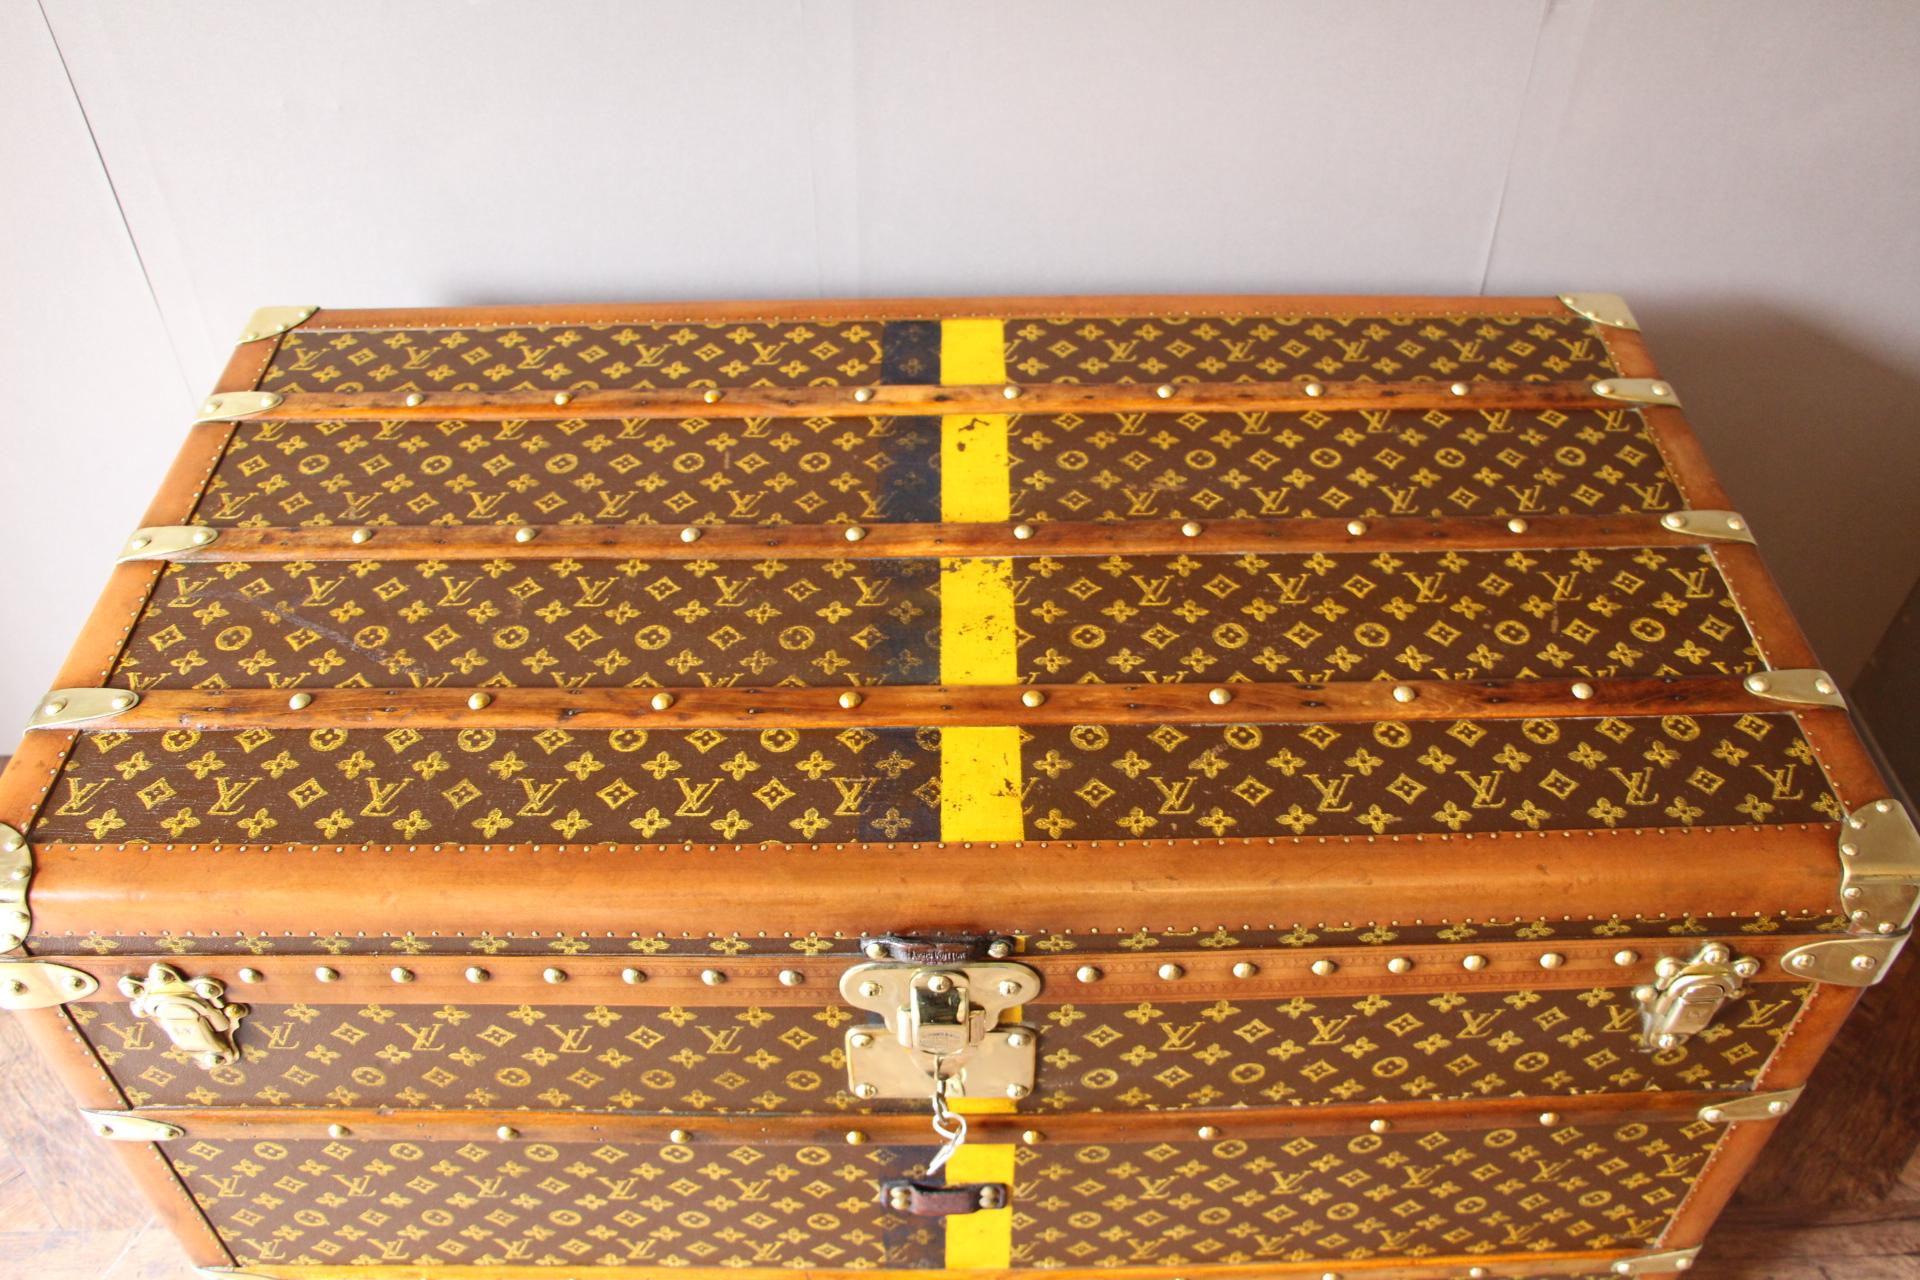 This beautiful Louis Vuitton trunk is all stenciled LV monogram canvas, with all Louis Vuitton stamped brass hardware and lozine trim. It features large leather side handles as well as customized painted yellow and blue stripes and MGM initials on